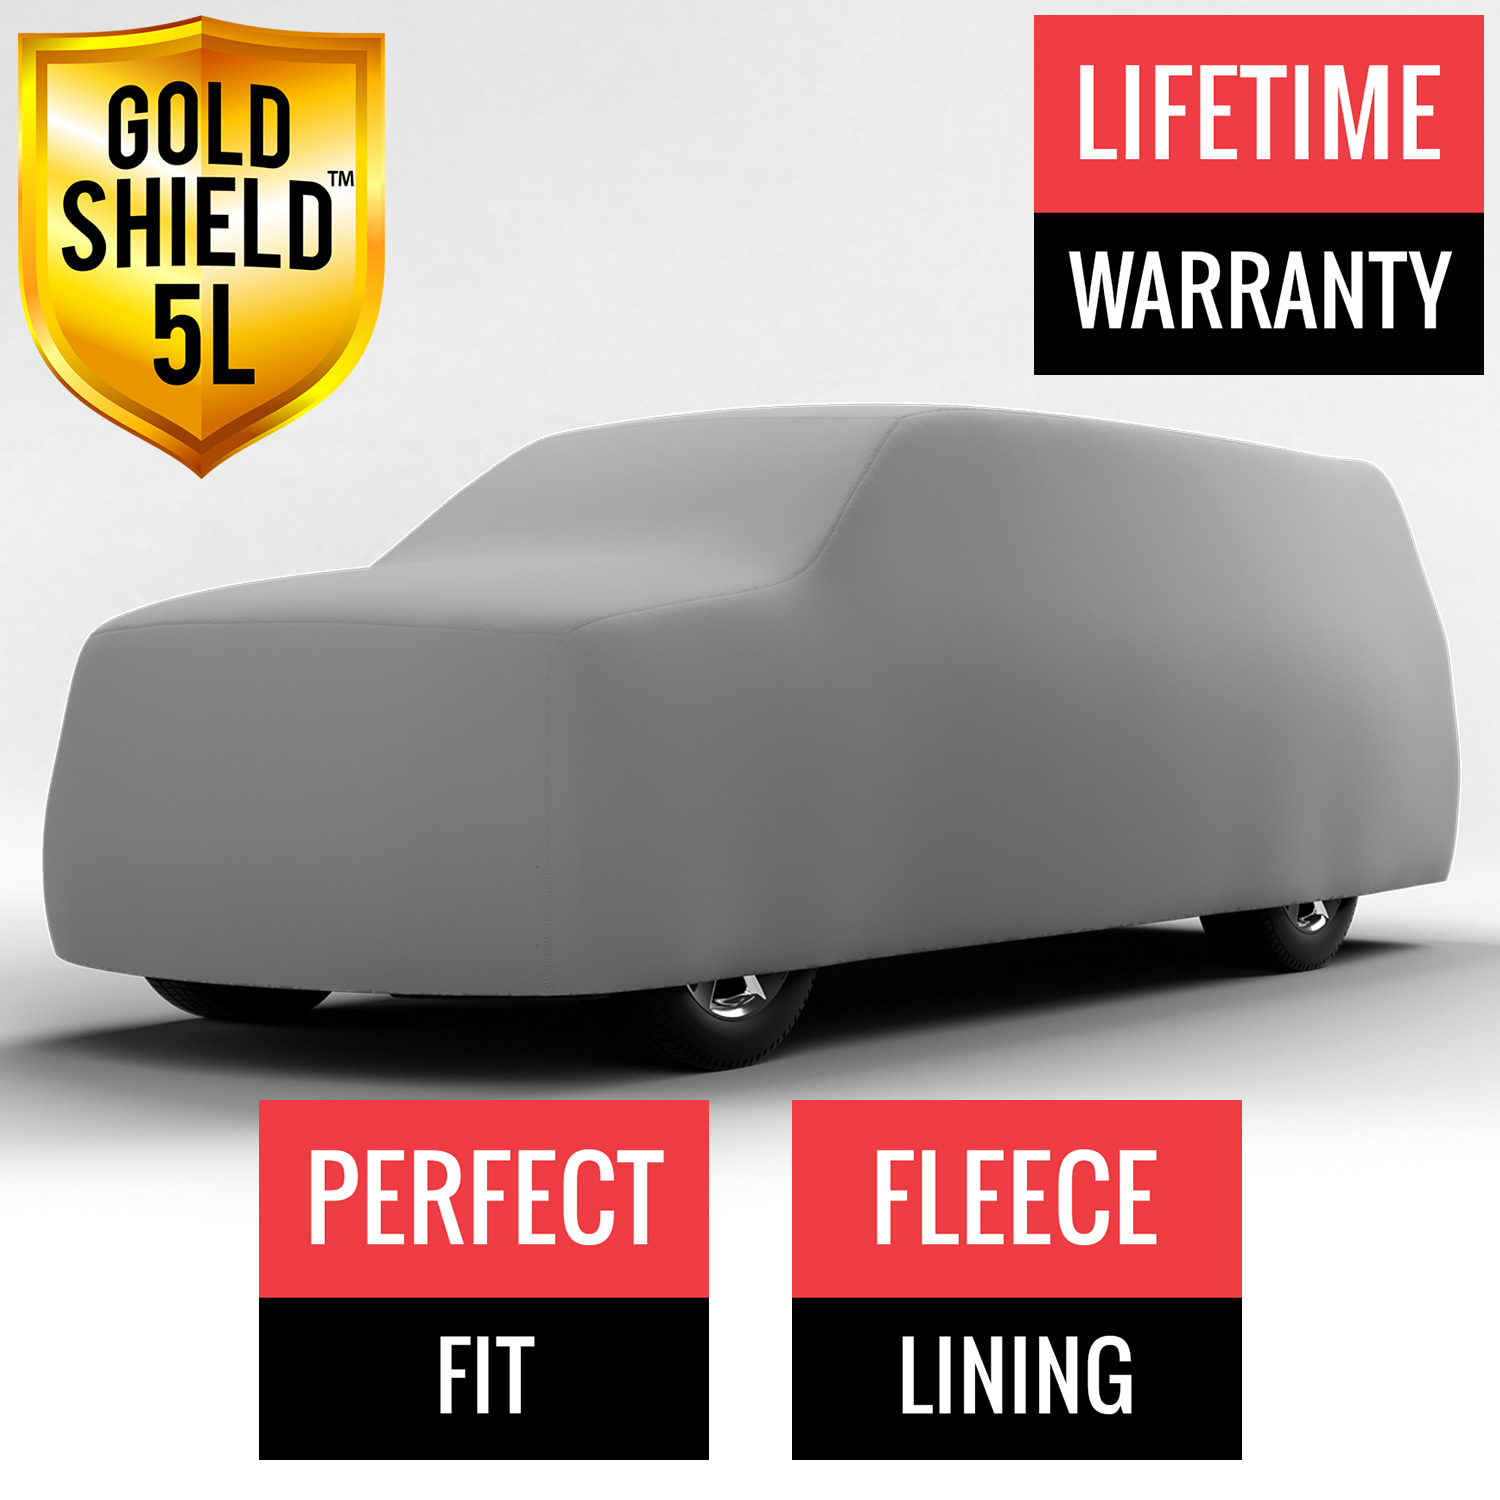 Gold Shield 5L - Car Cover for GMC K15 Pickup 1972 Regular Cab Pickup 6.5 Feet Bed with Camper Shell